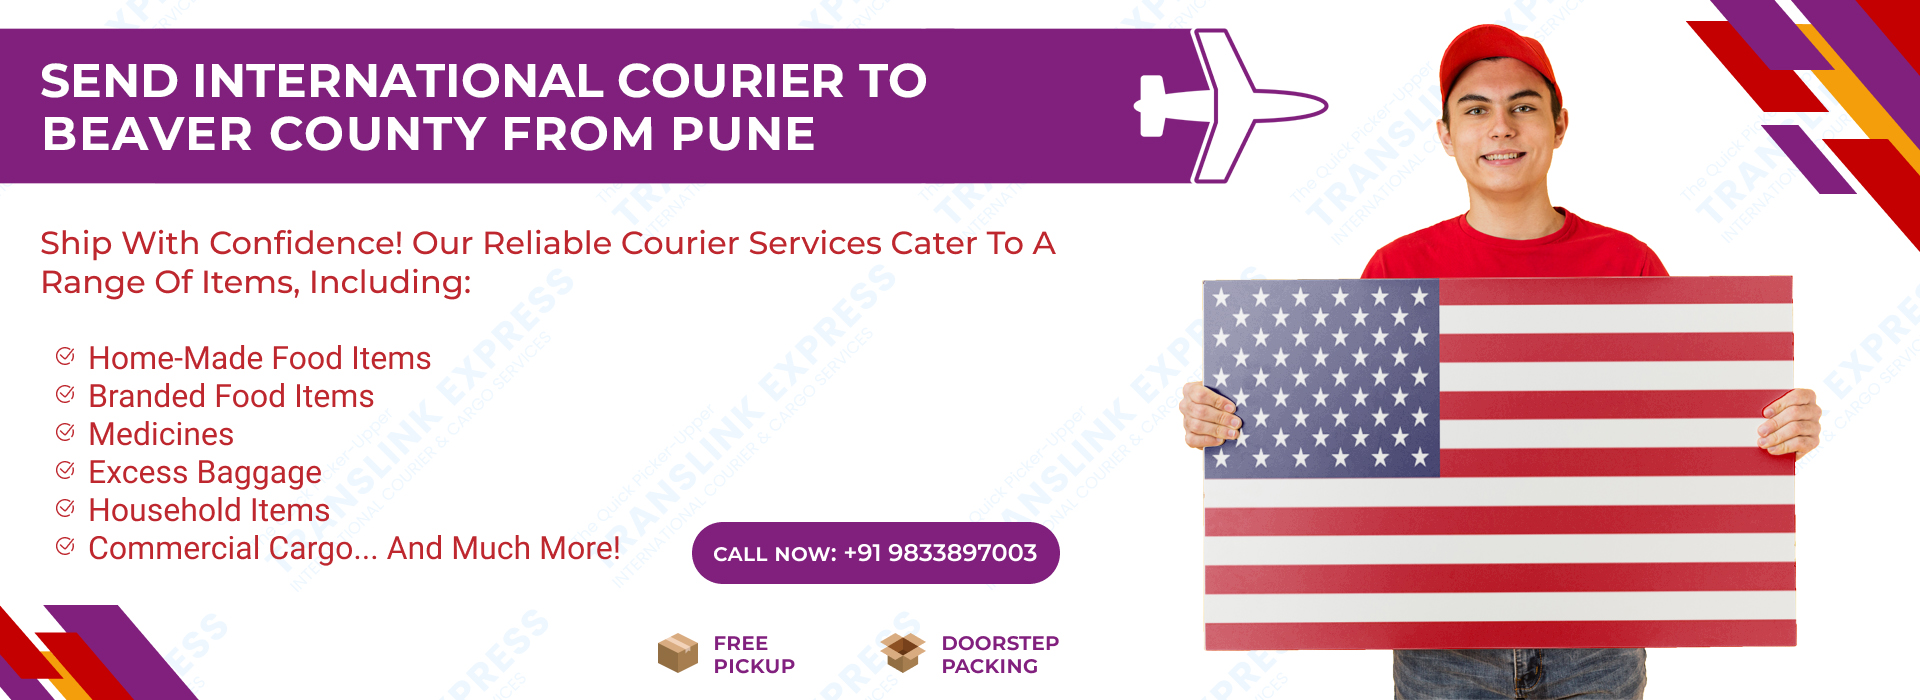 Courier to Beaver County From Pune